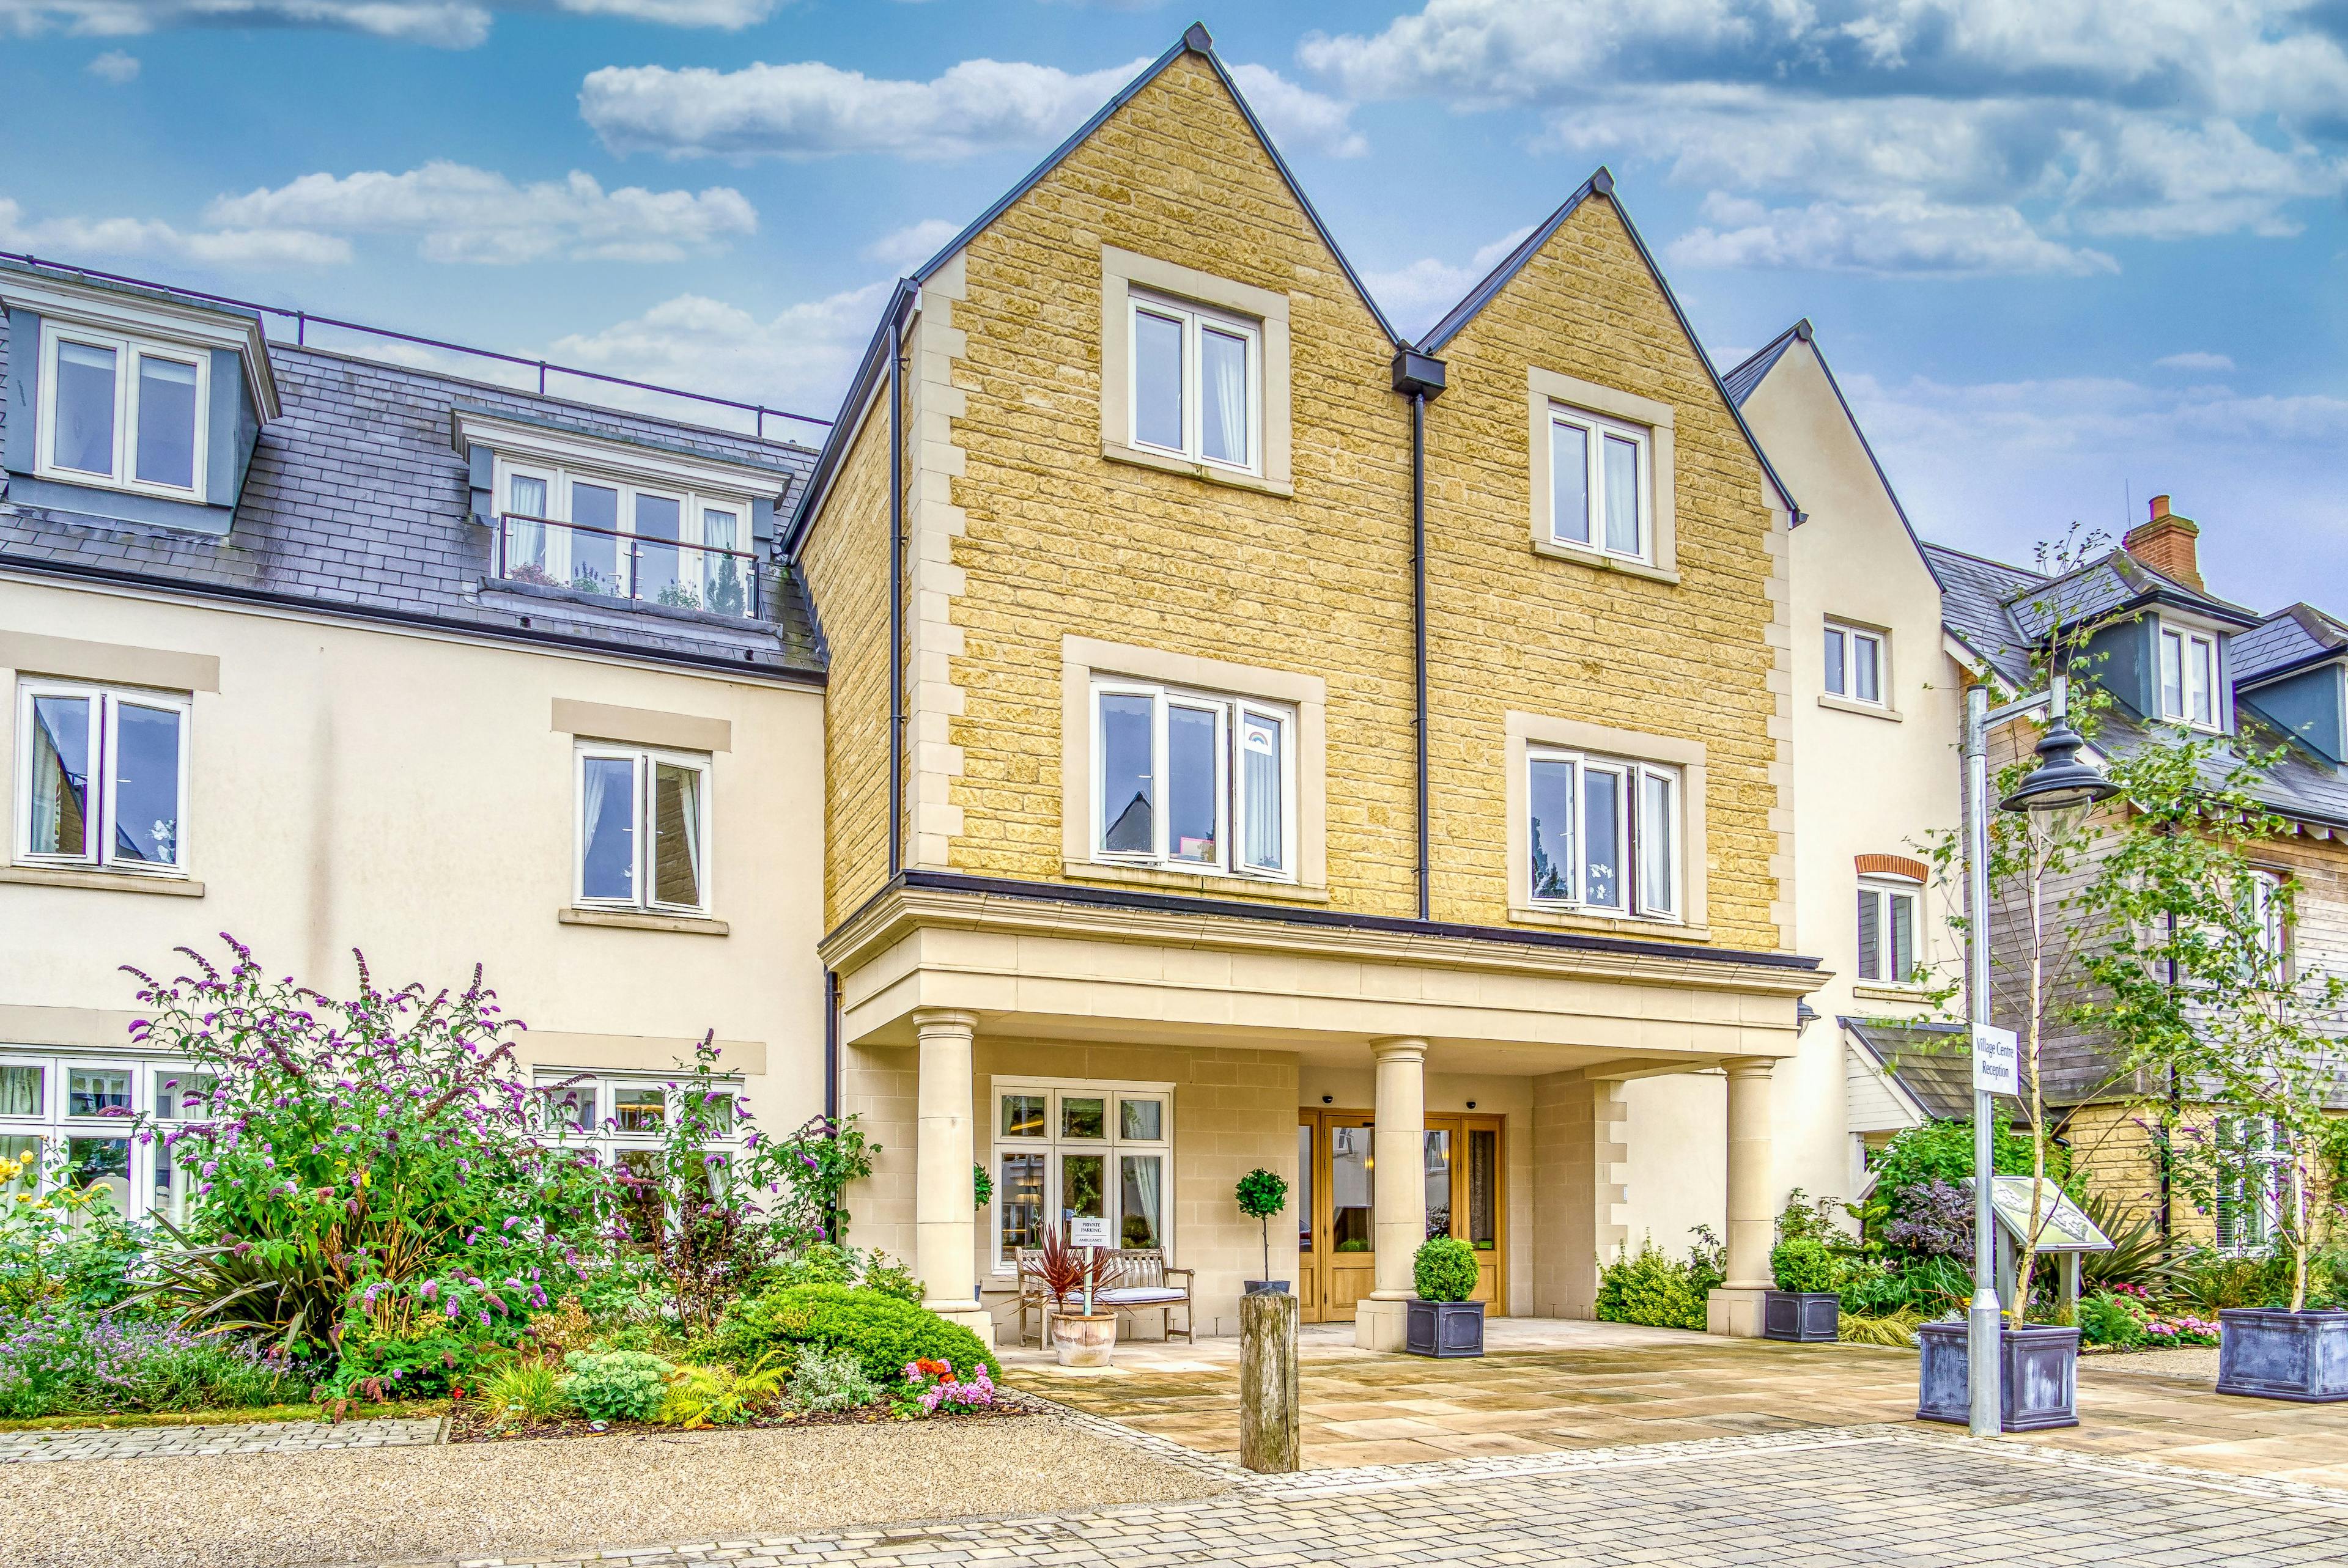 Exterior of Witney care home in Witney, Oxfordshire